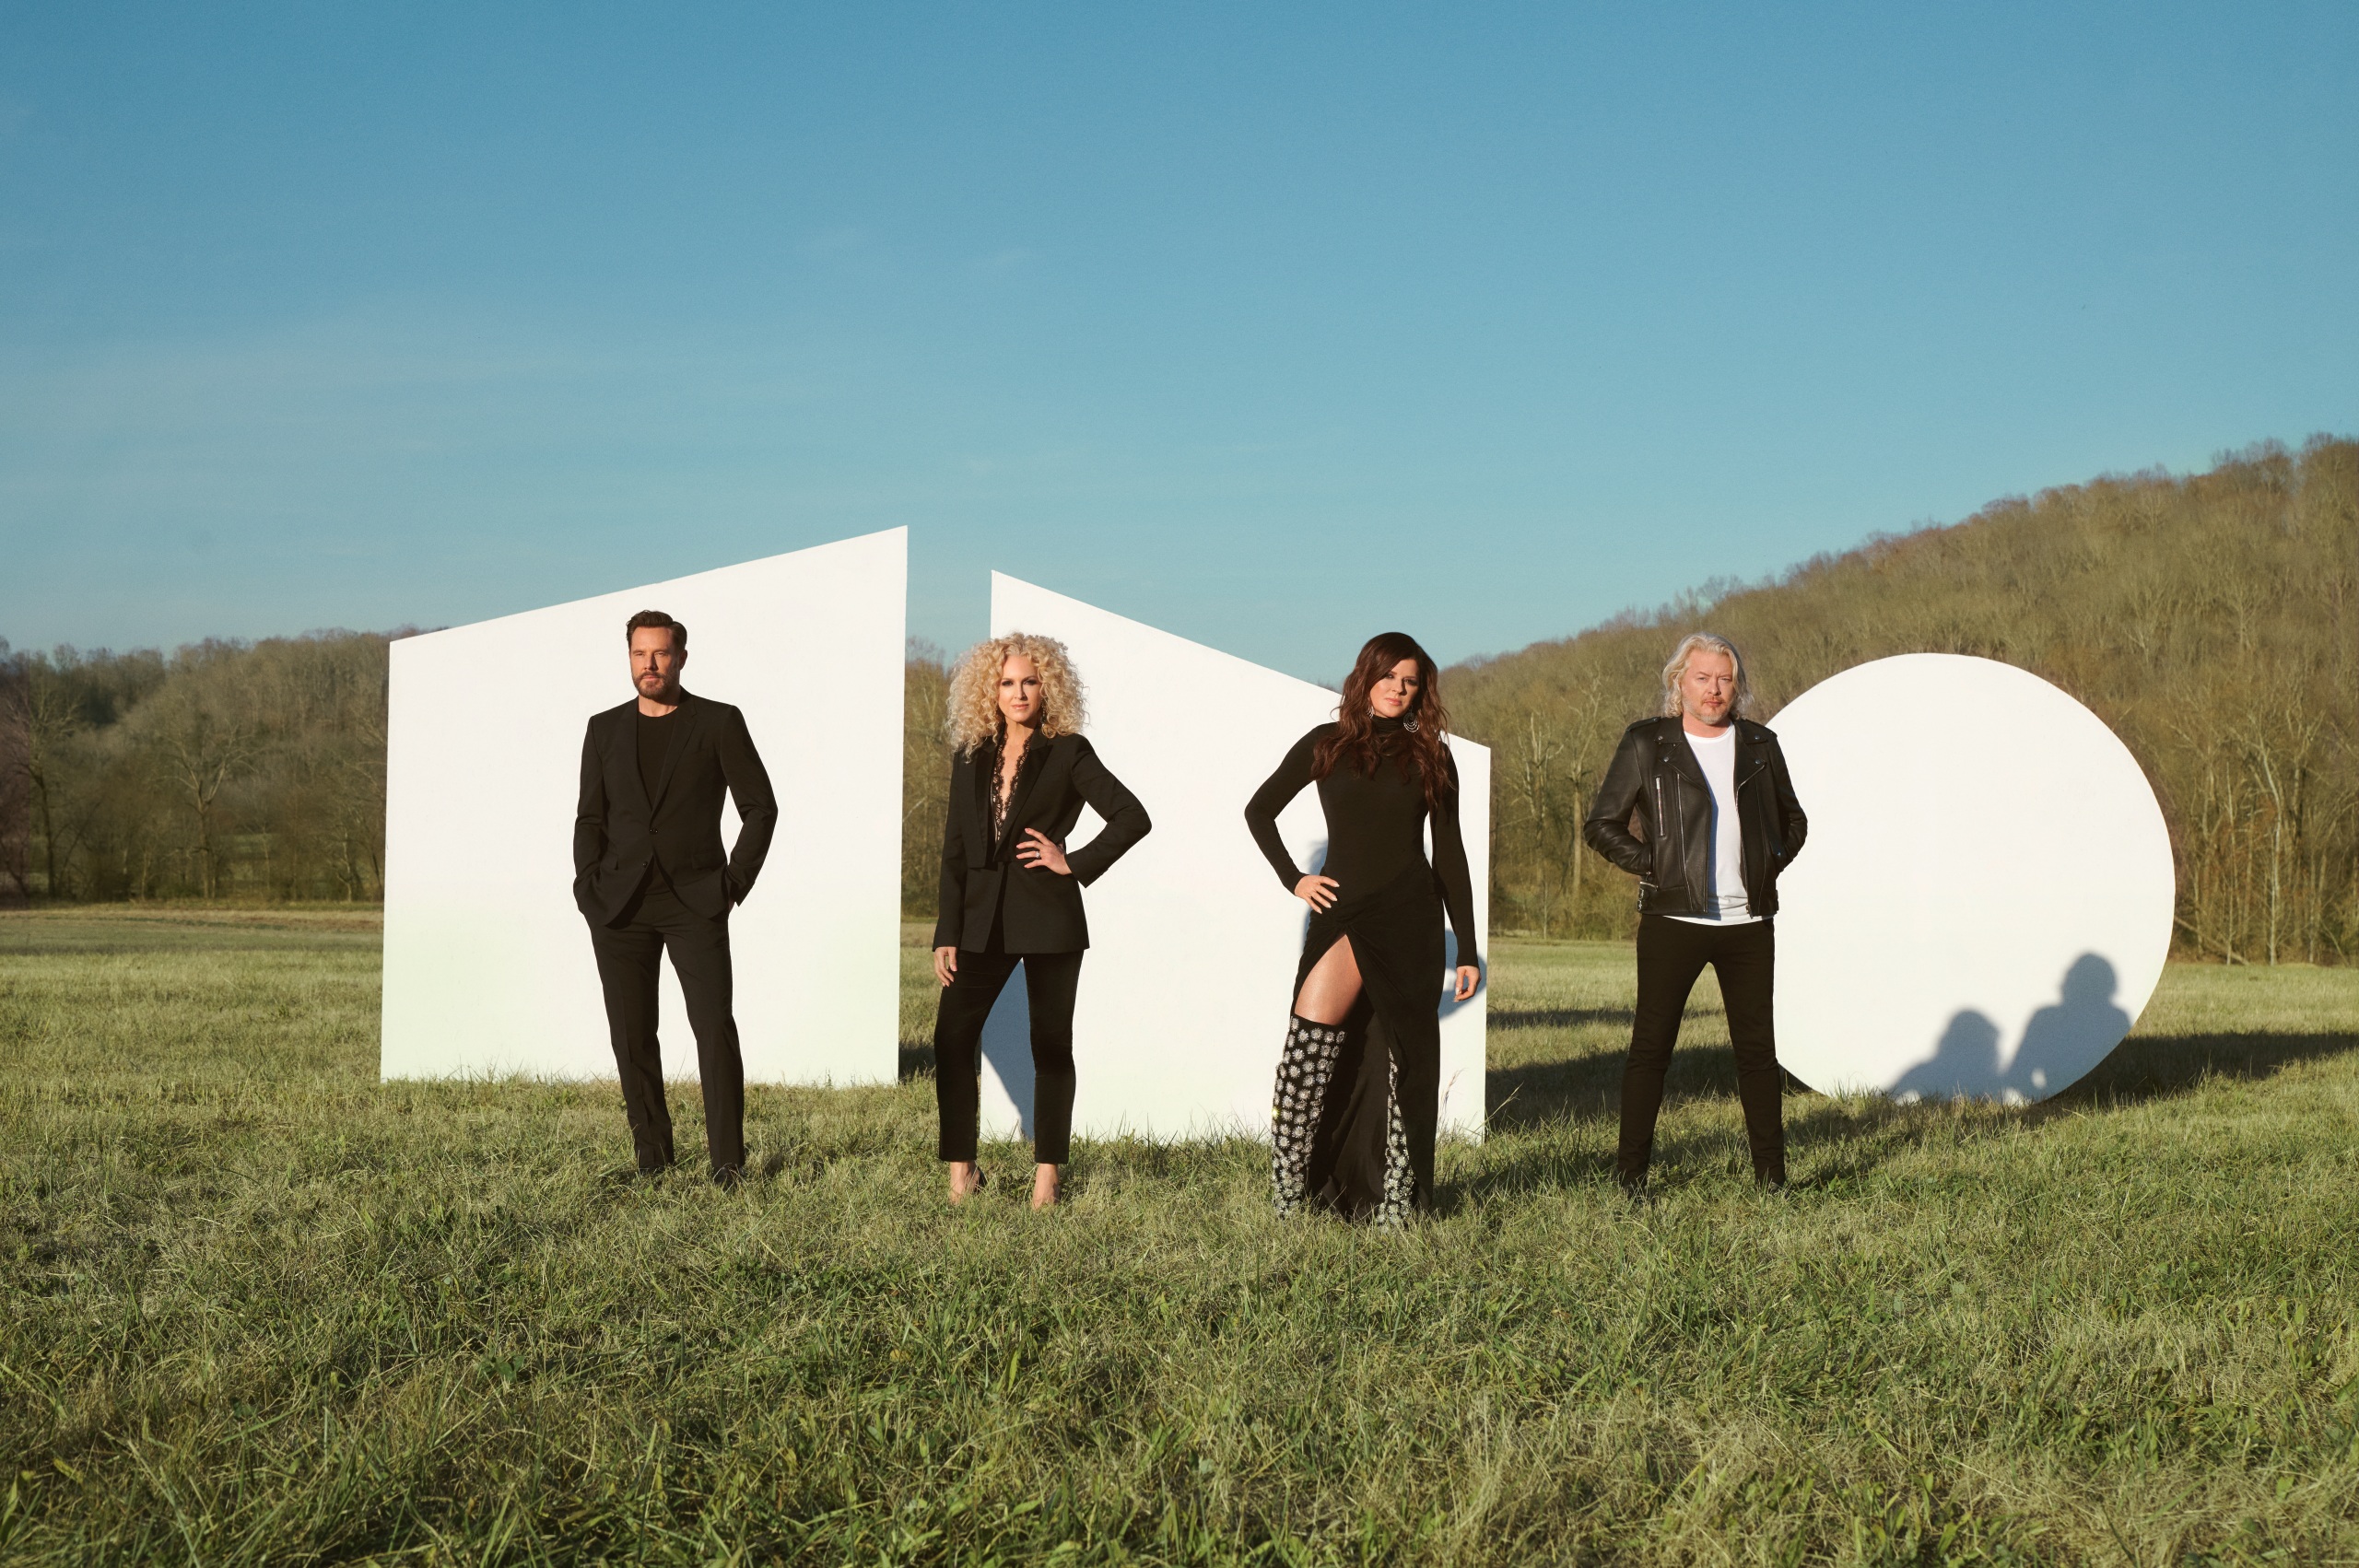 LITTLE BIG TOWN DEBUTS NEW TRACK “BETTER LOVE” FROM UPCOMING ALBUM MR. SUN.